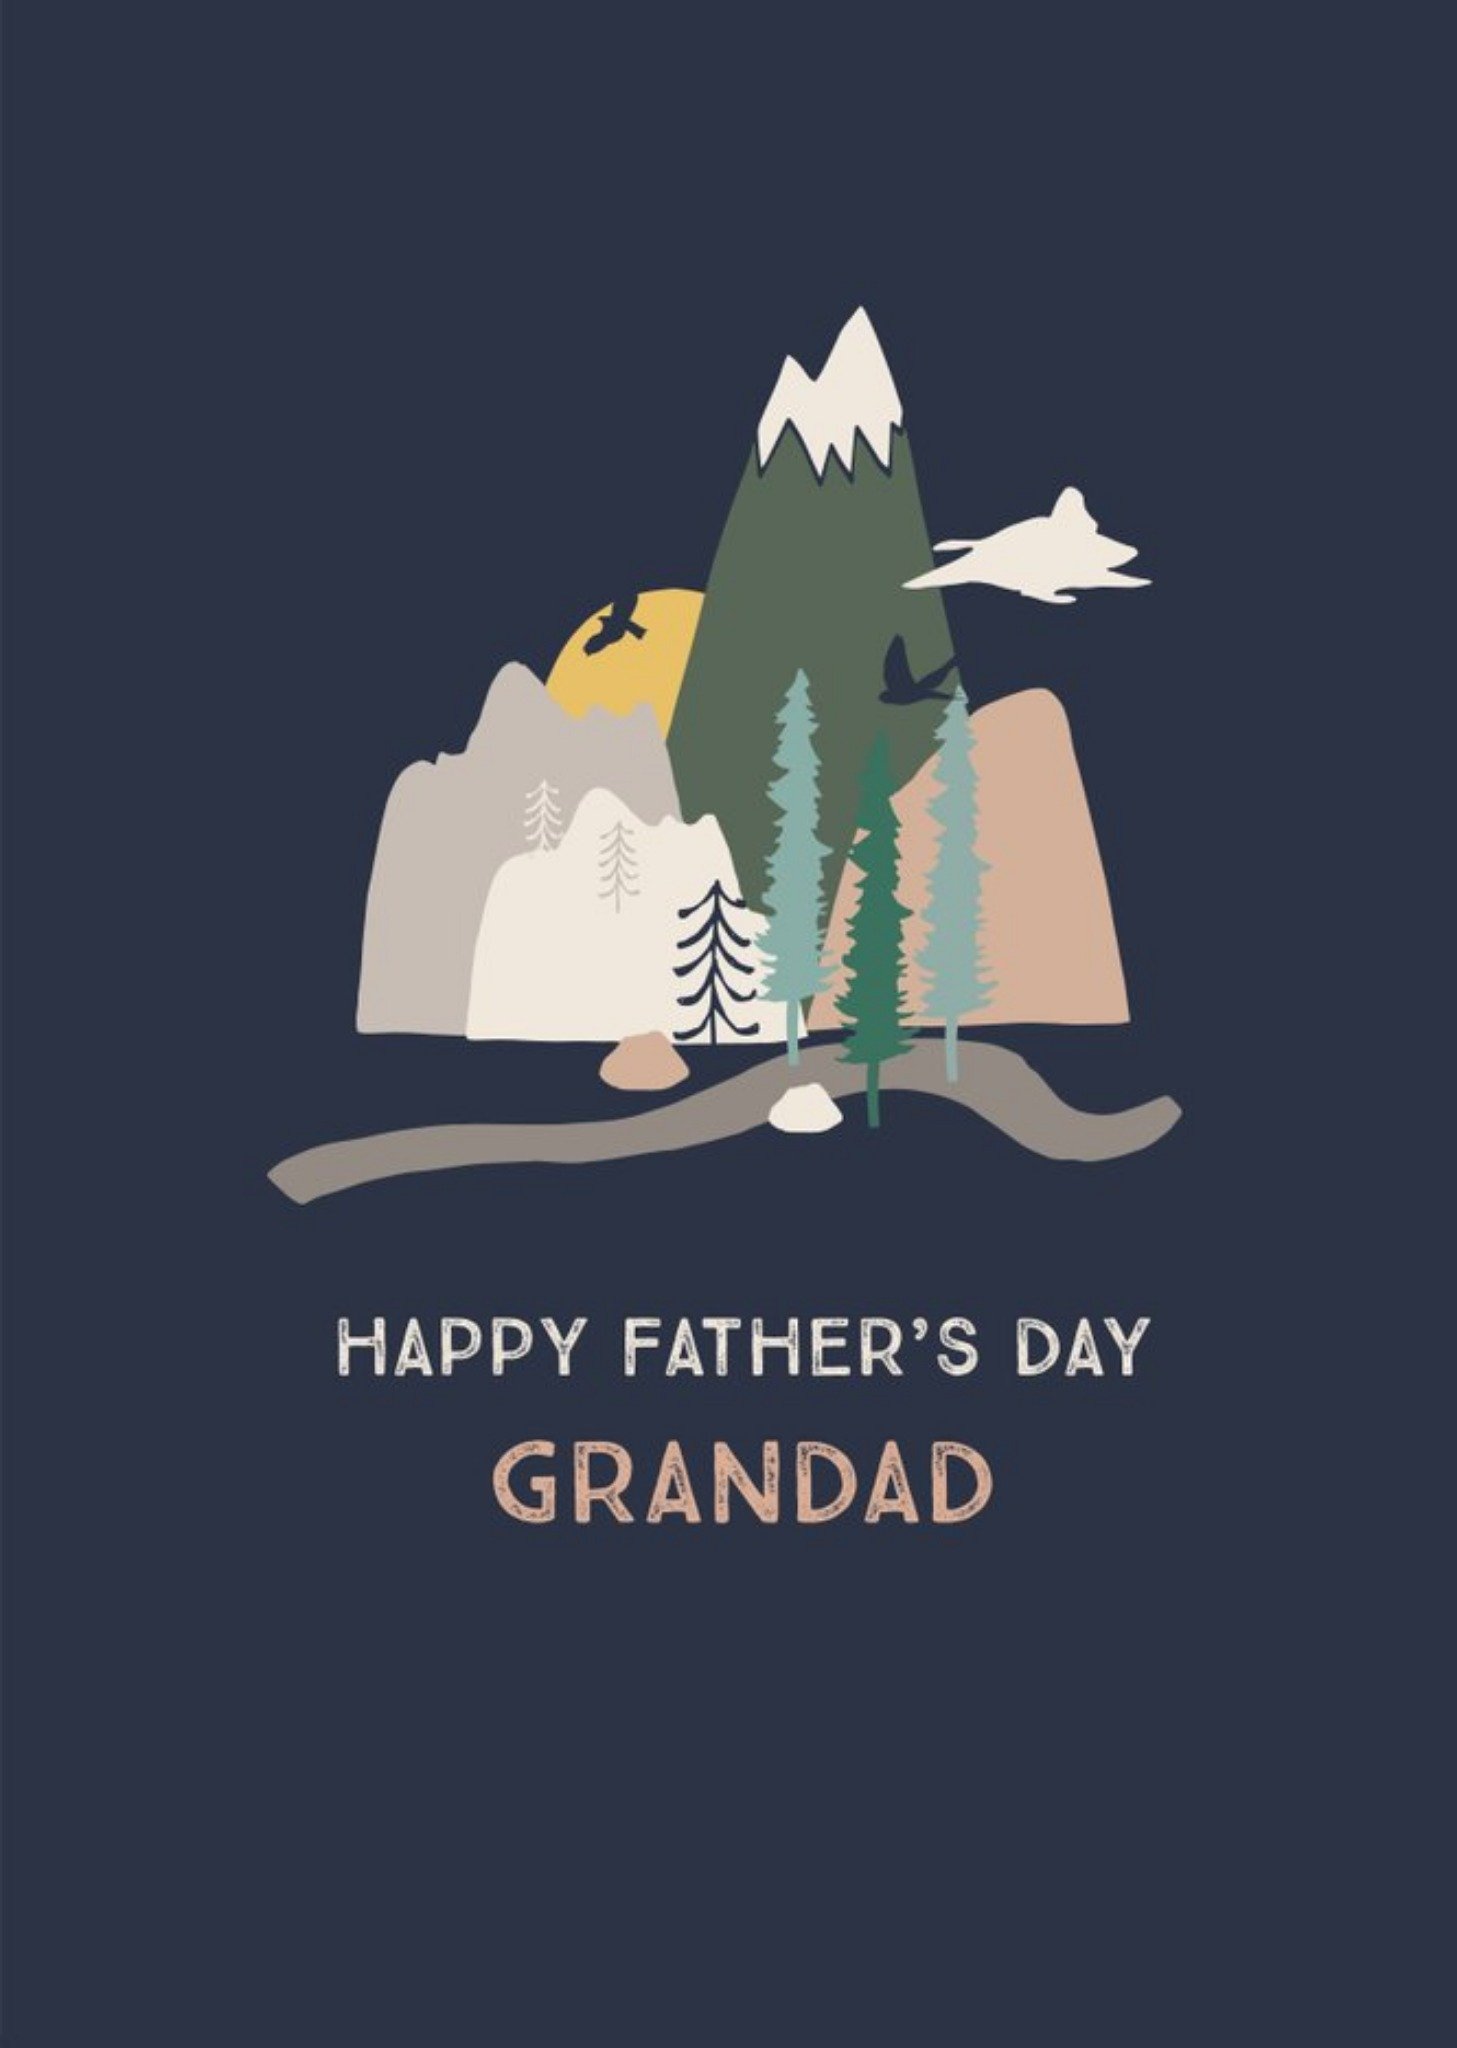 Moonpig Illustrated Mountains River Camping Happy Fathers Day Grandad Ecard